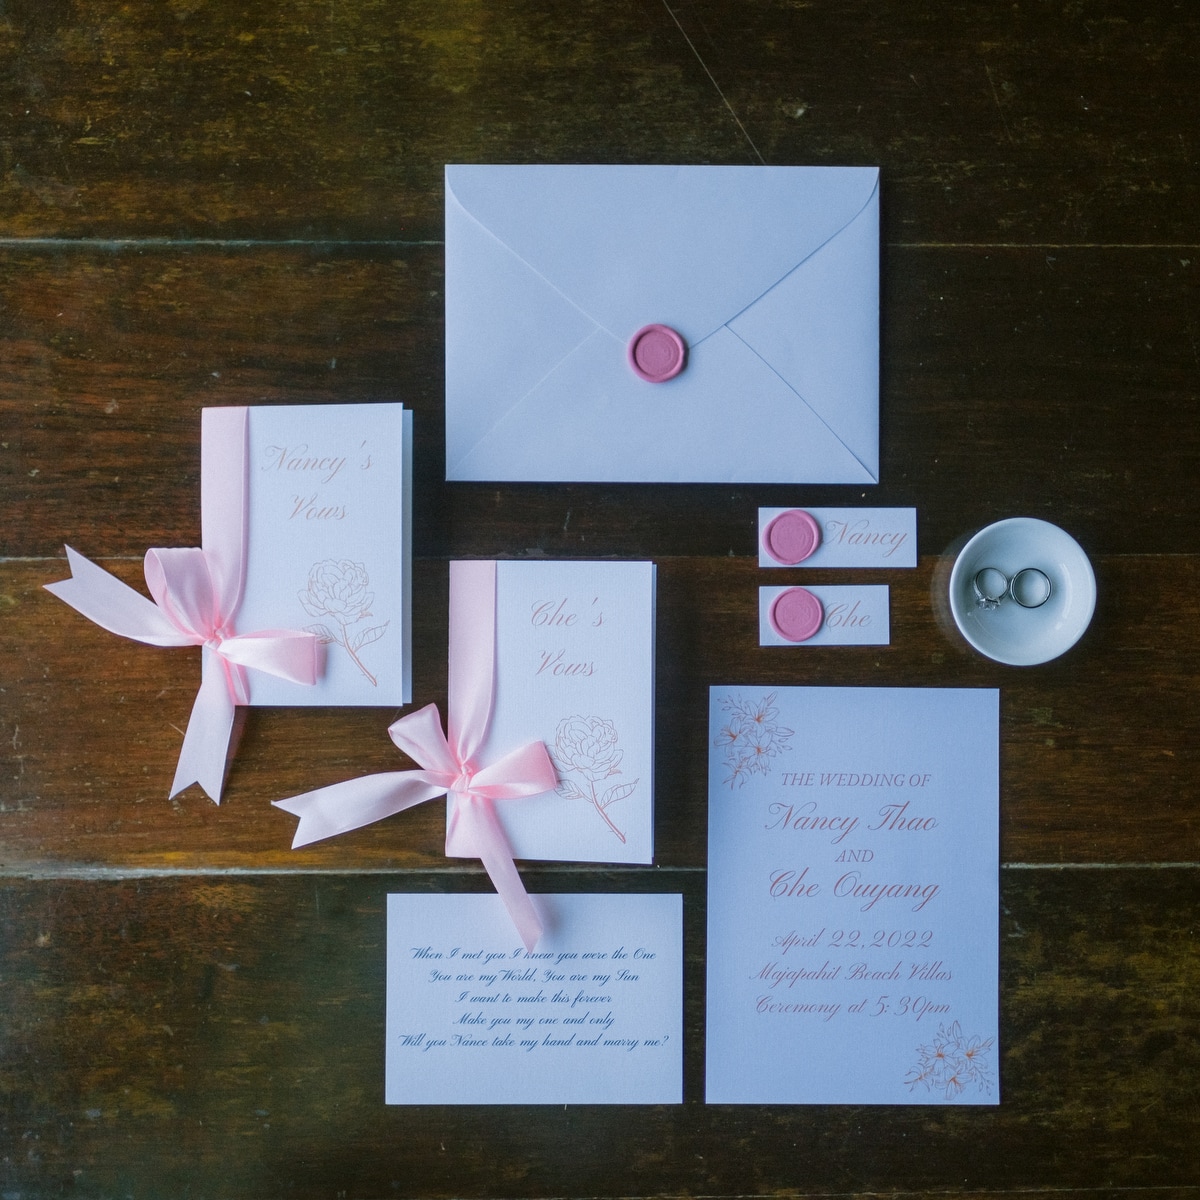 Bali wedding invitation set with the rings